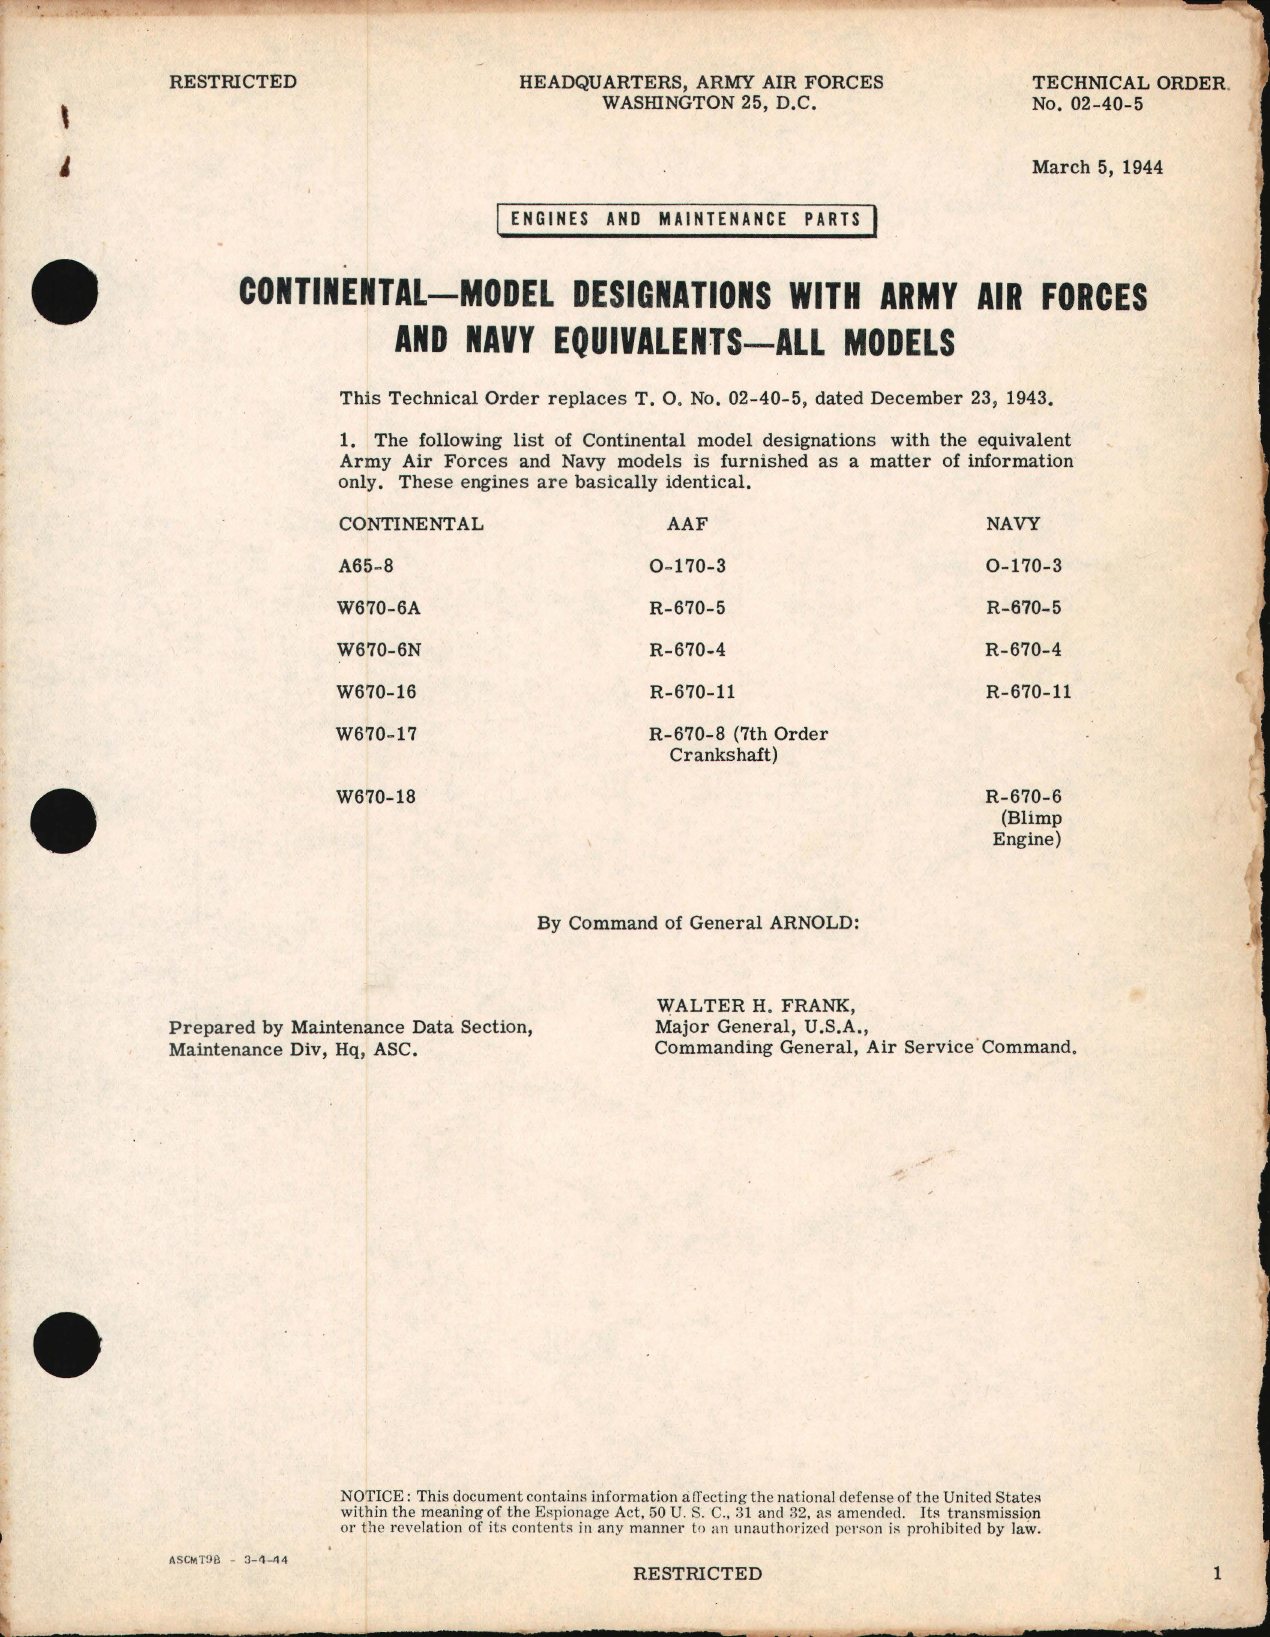 Sample page 1 from AirCorps Library document: Model Designations with Army Air Forces and Navy Equivalents - A65, W670, O-170, and R-670 Series Engines